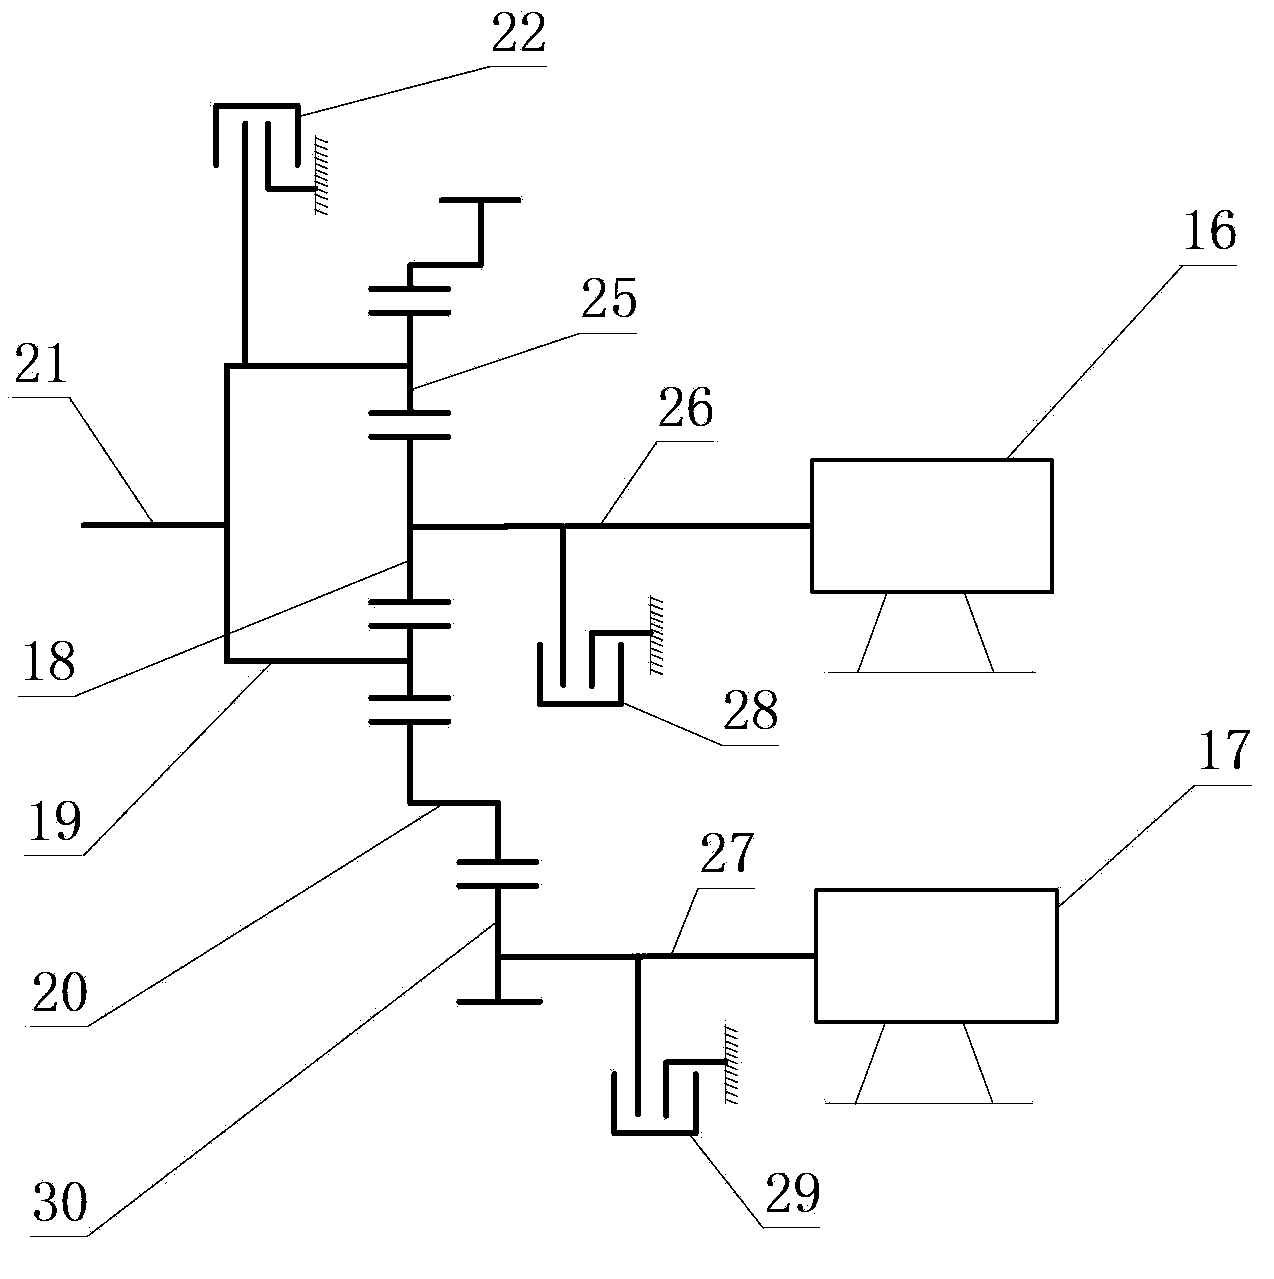 Different connection motor